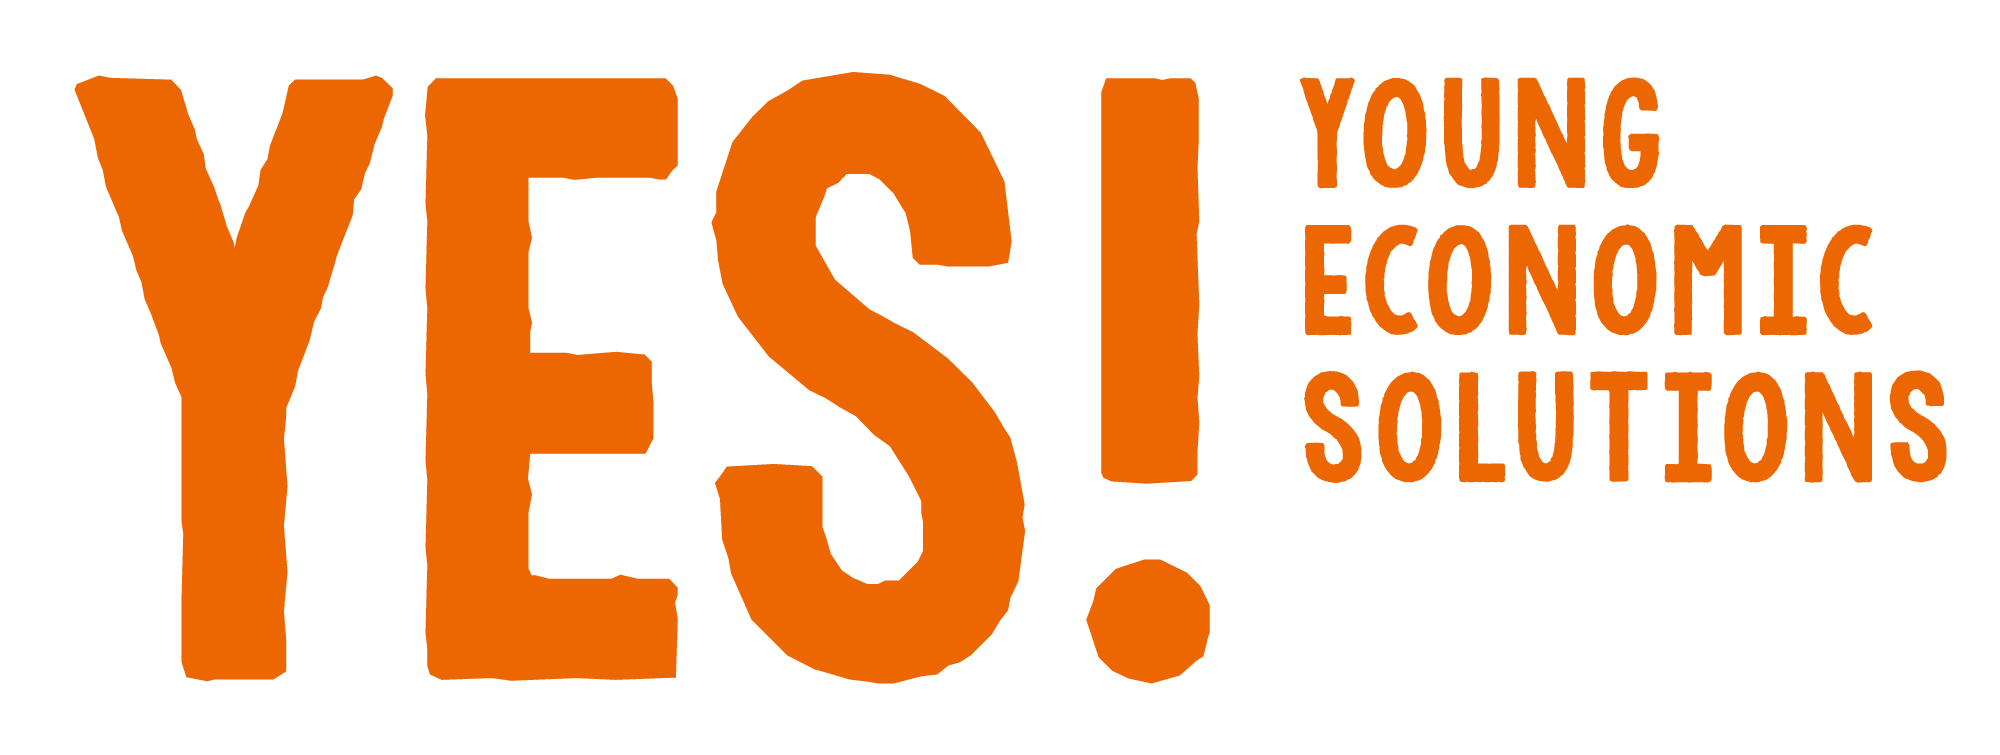 YES! - Young Economic Solutions